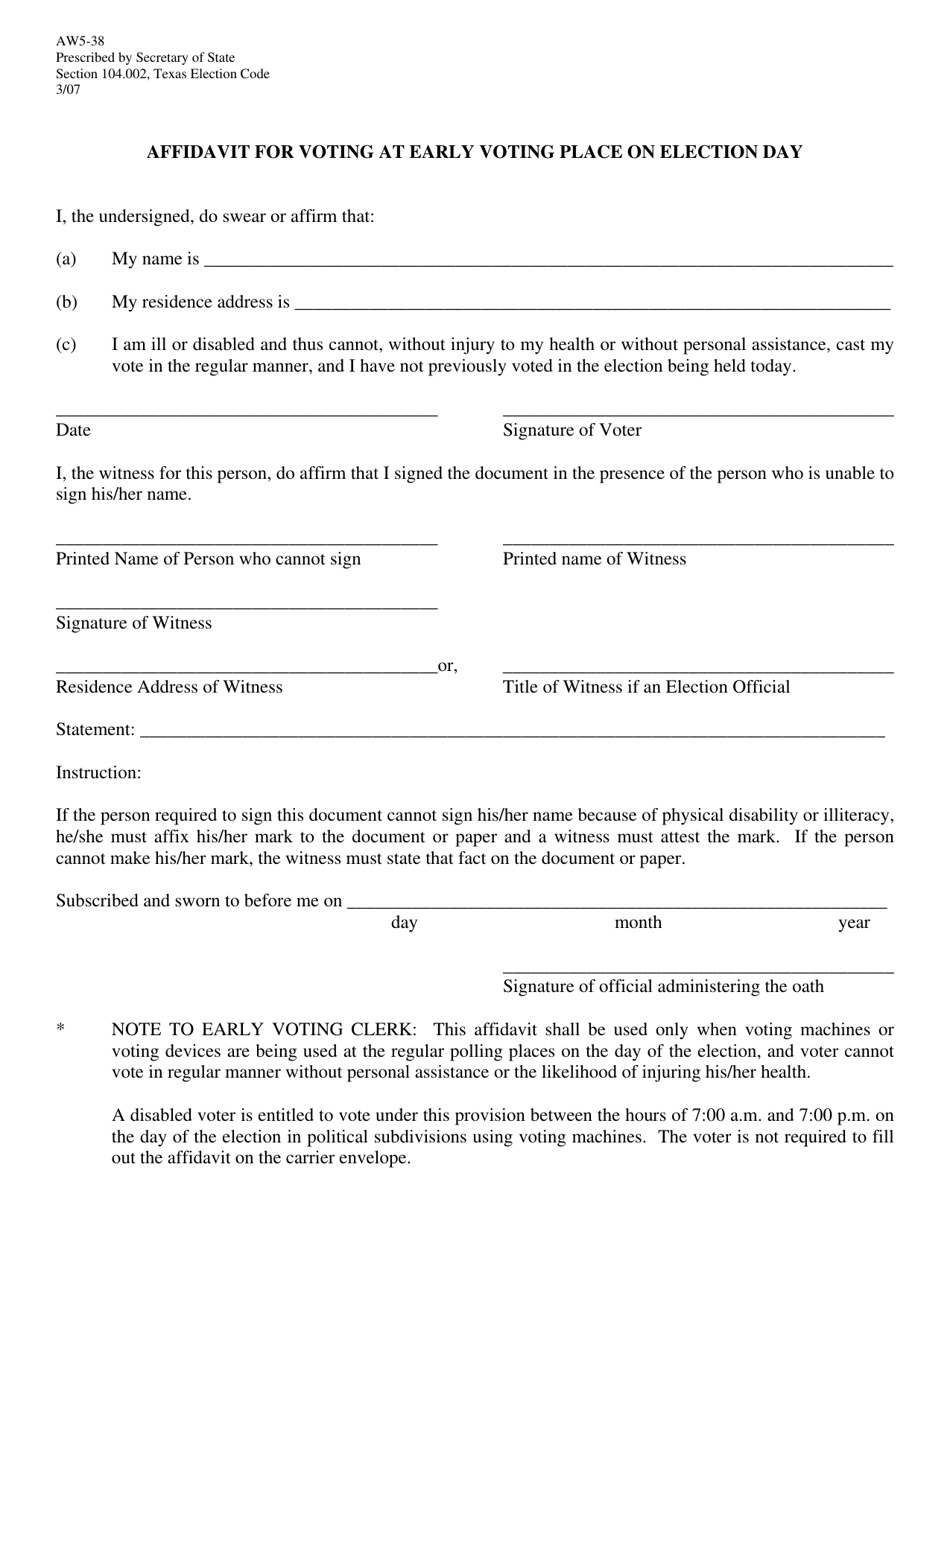 Form AW5-38 Affidavit for Voting at Early Voting Place on Election Day - Texas (English / Spanish), Page 1